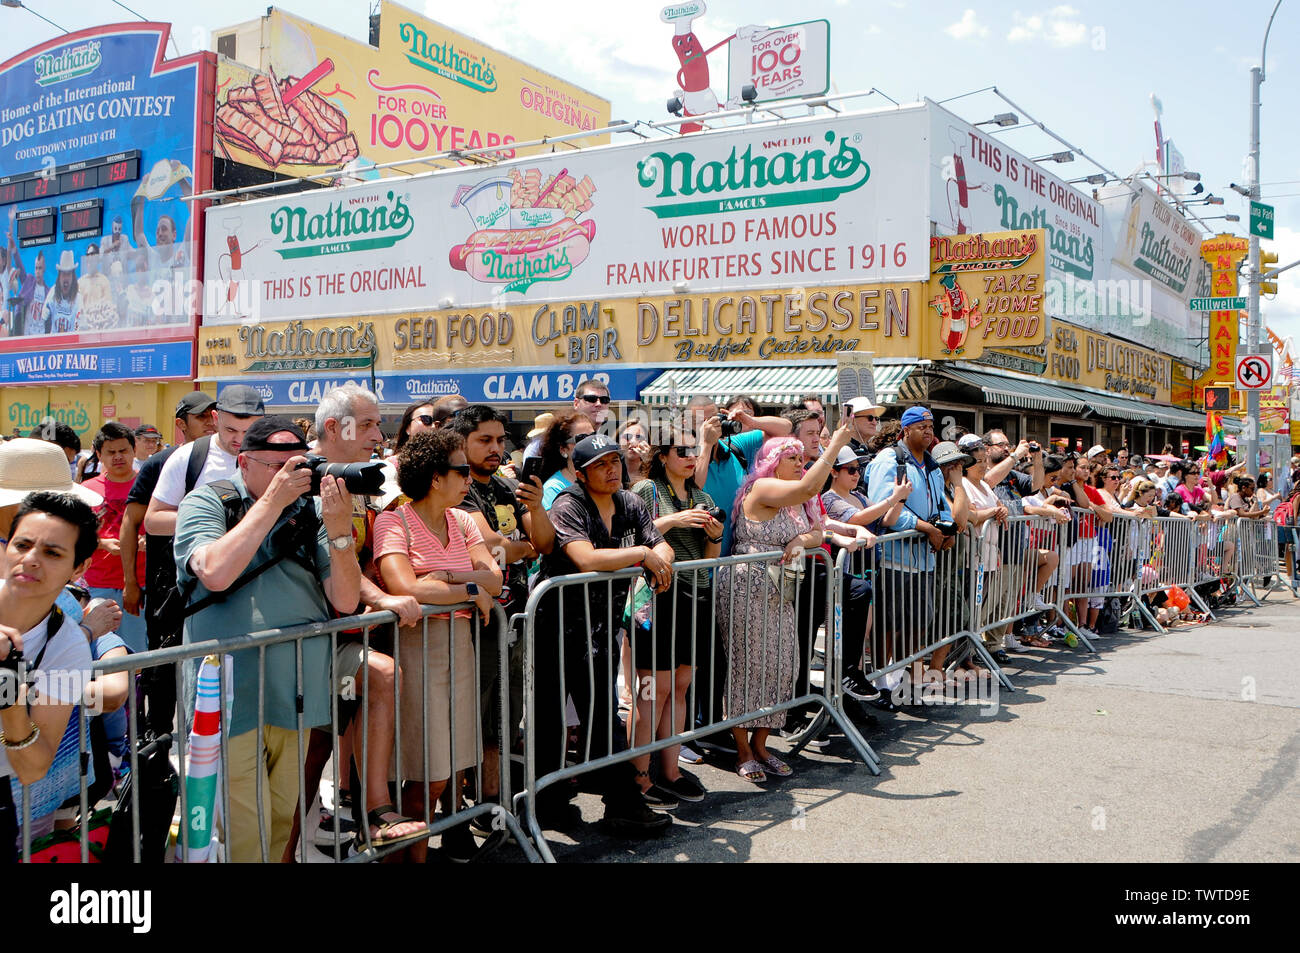 Crowds of people gathered during the Event,The 37th Annual Mermaid Parade was held at Coney Island, in New York City.  It is the largest art parade in the USA and one of New York City's greatest summer events. Stock Photo